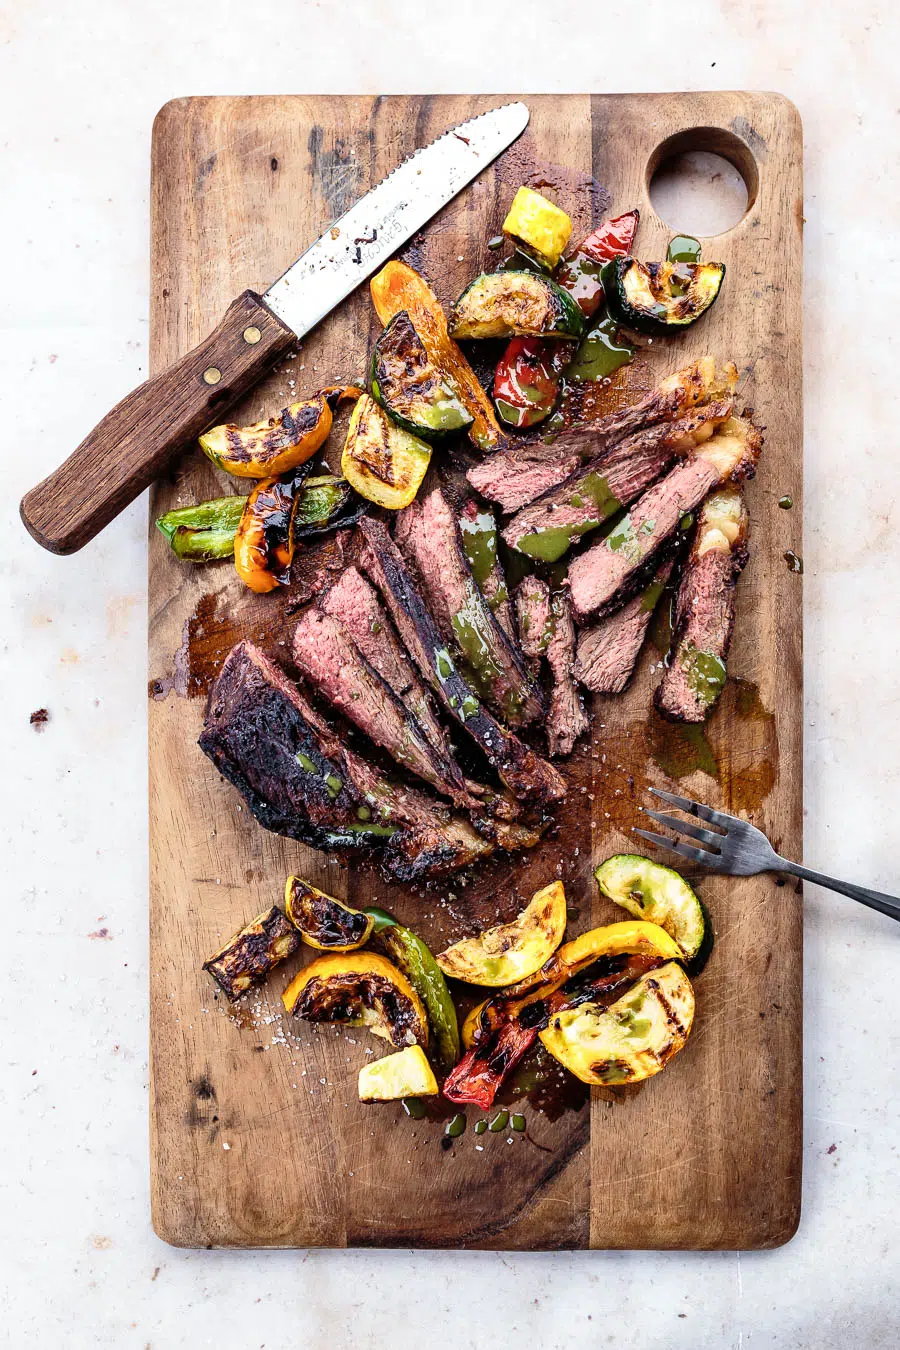 Grilled picanha steak is sliced with chopped vegetables and chimichurri sauce served on a wooden cutting board. A fork and a steak knife are sitting on opposite end of the board.